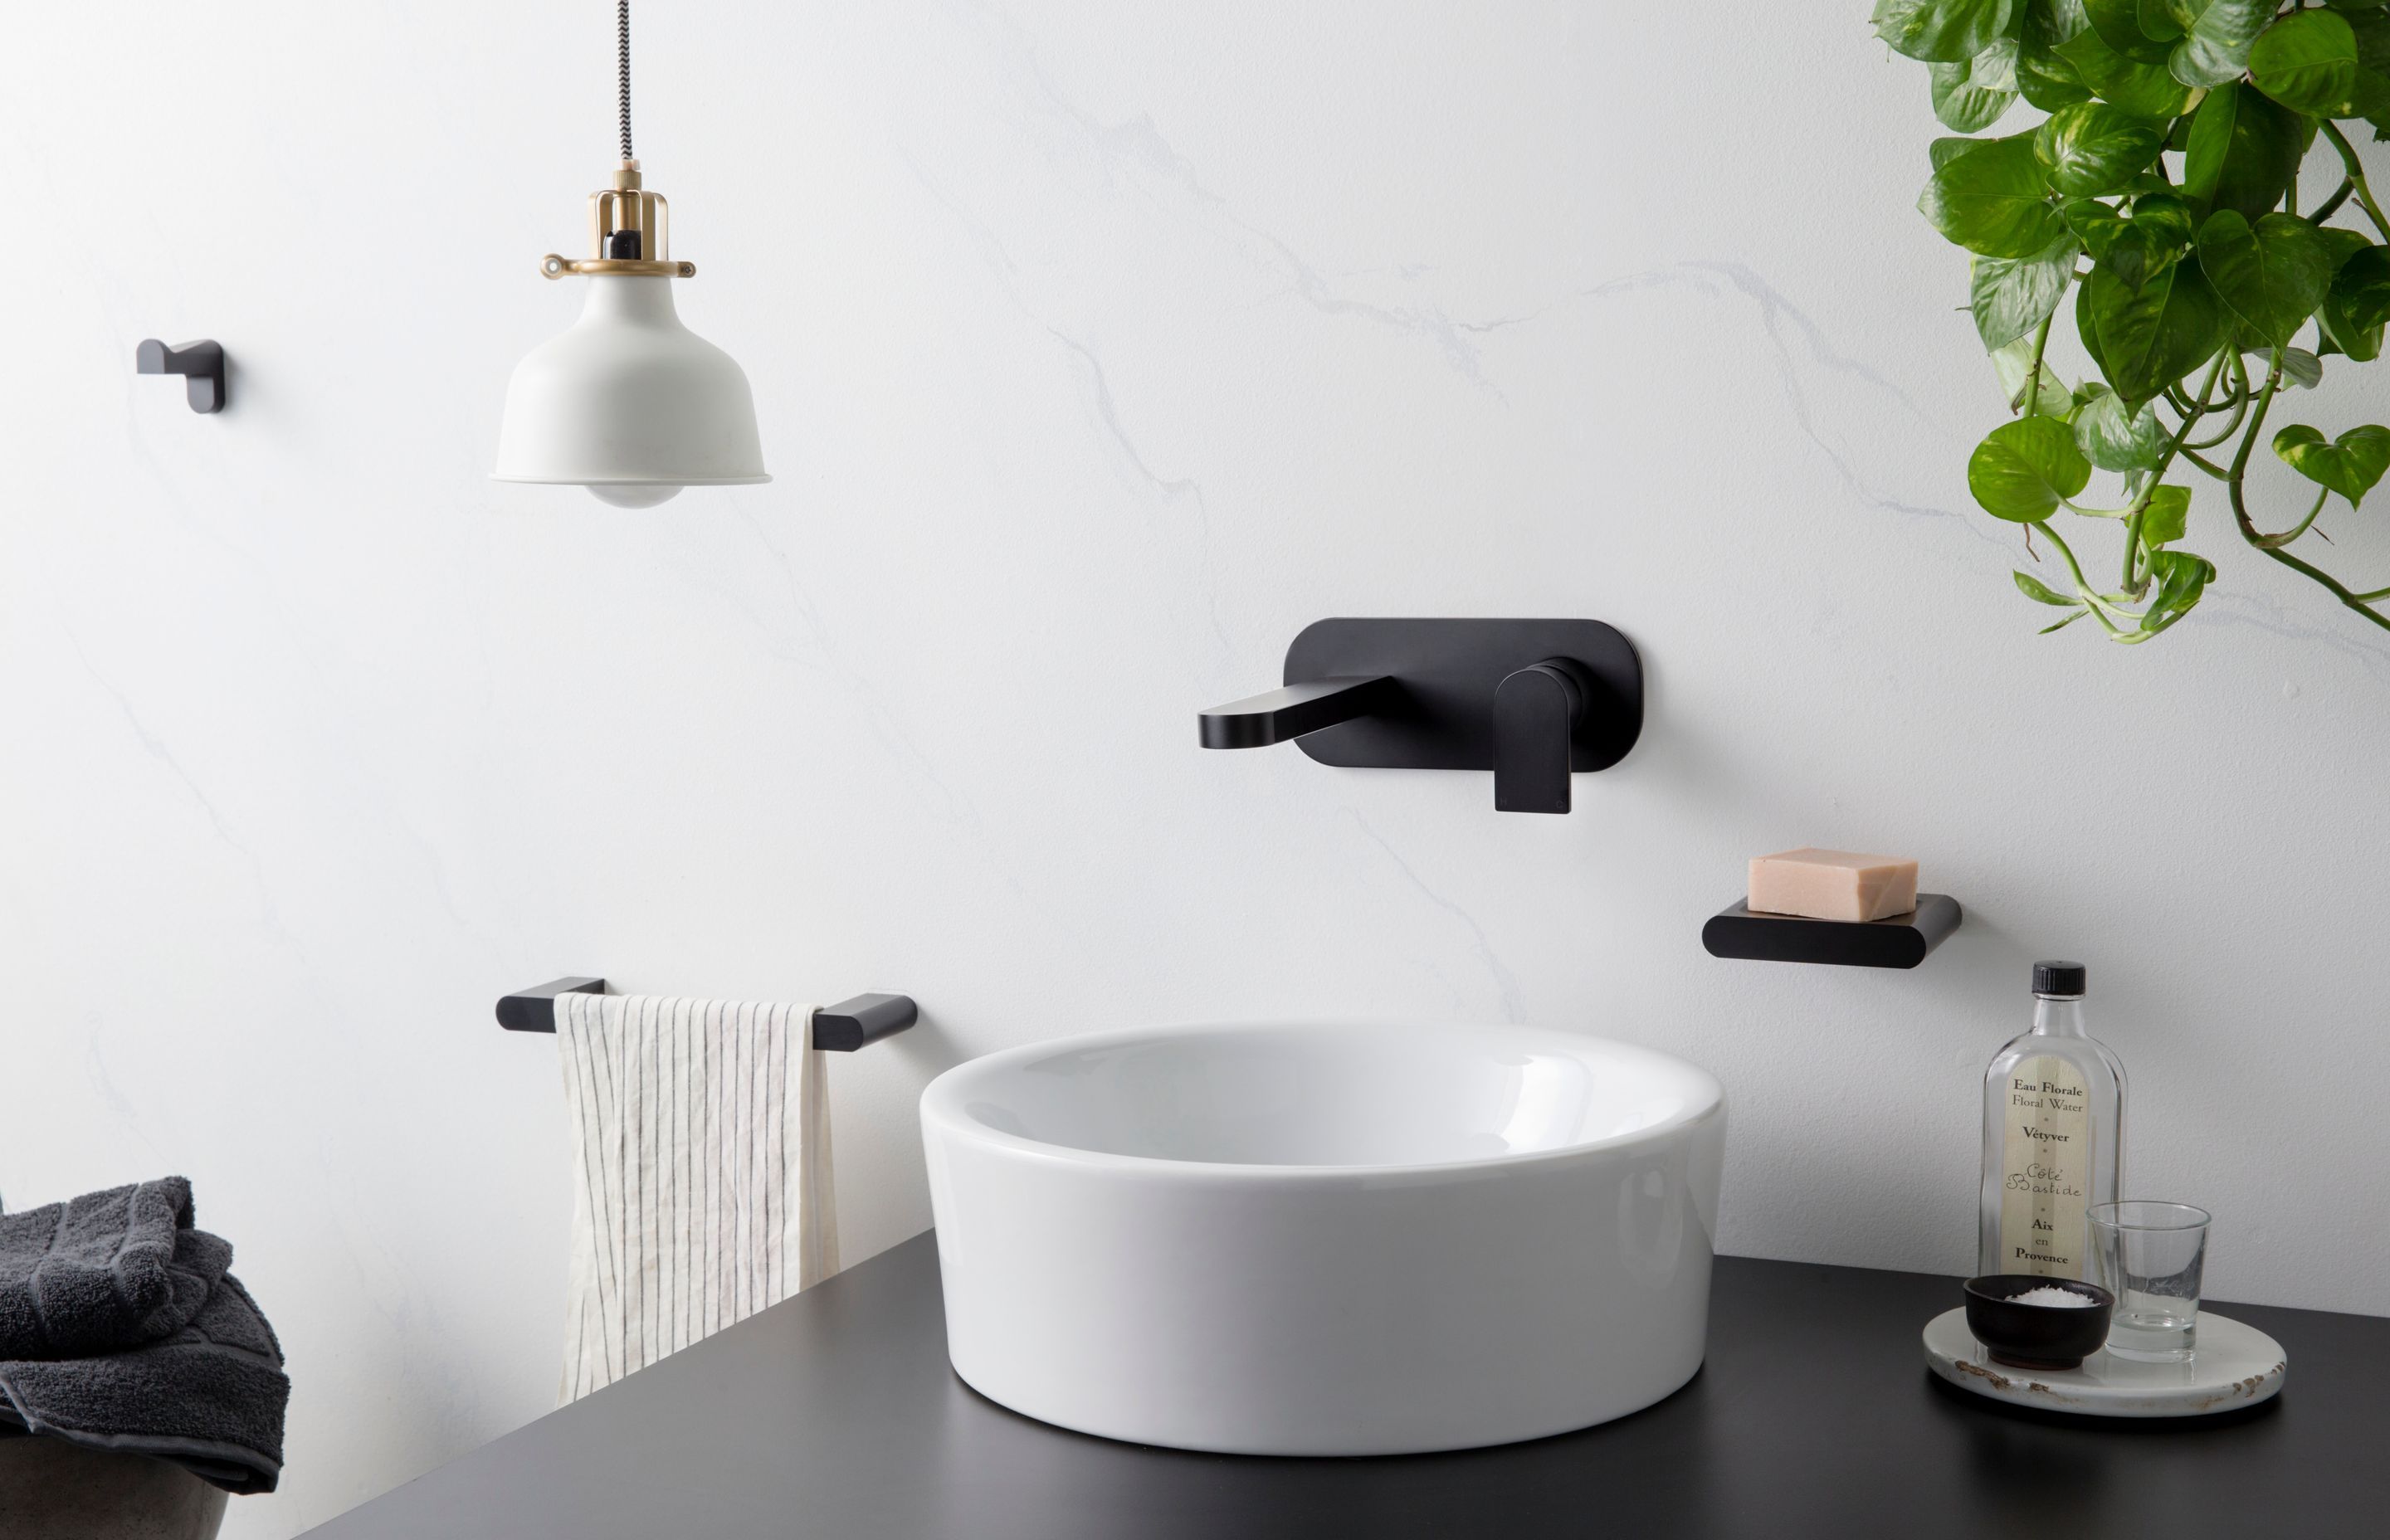 Contemporary bathrooms often feature basins which are placed above the countertop with tapware attached on the wall (Metropolis Black matte tapware from The Kitchen Hub)